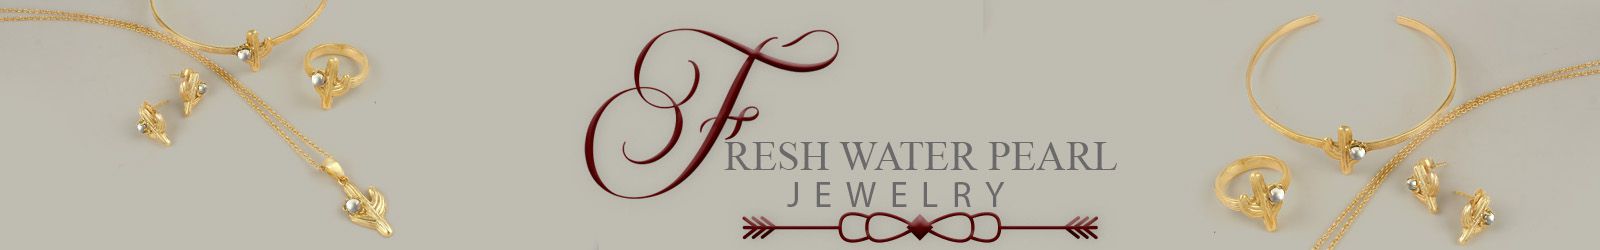 Silver Fresh Water Pearl Jewelry Wholesale Supplier